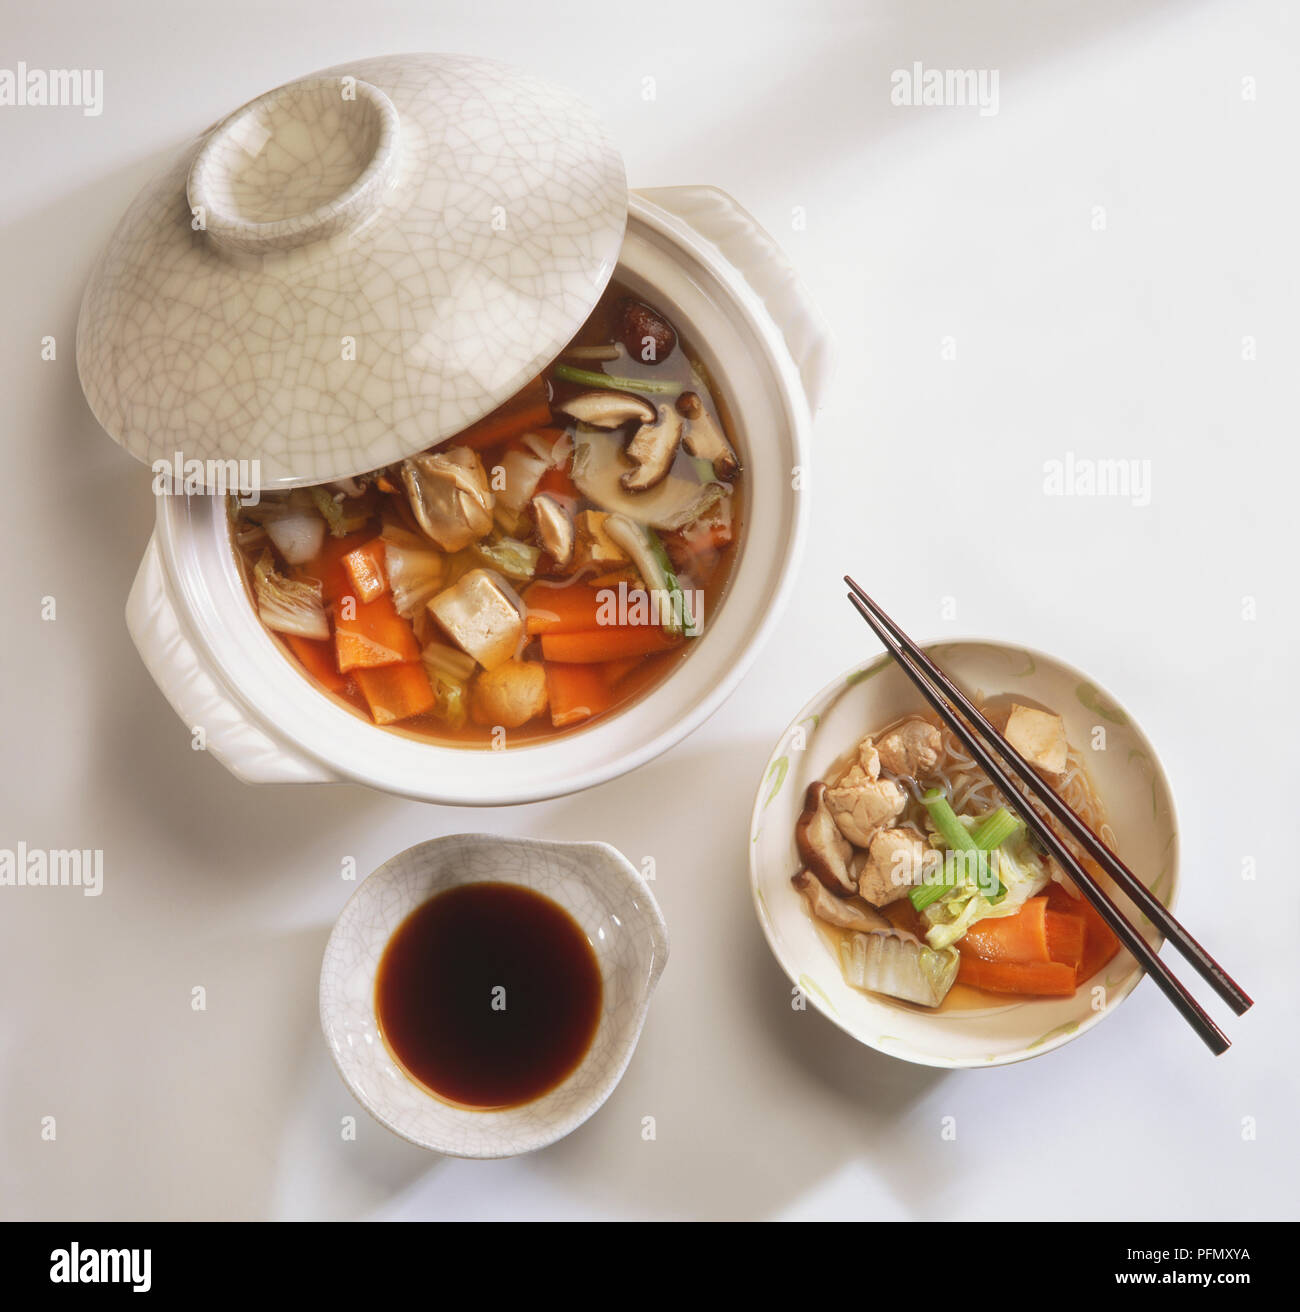 https://c8.alamy.com/comp/PFMXYA/yosenabe-seafood-chicken-and-vegetable-soup-served-in-soup-bowl-and-smaller-soup-dish-with-soy-sauce-dip-view-from-above-PFMXYA.jpg